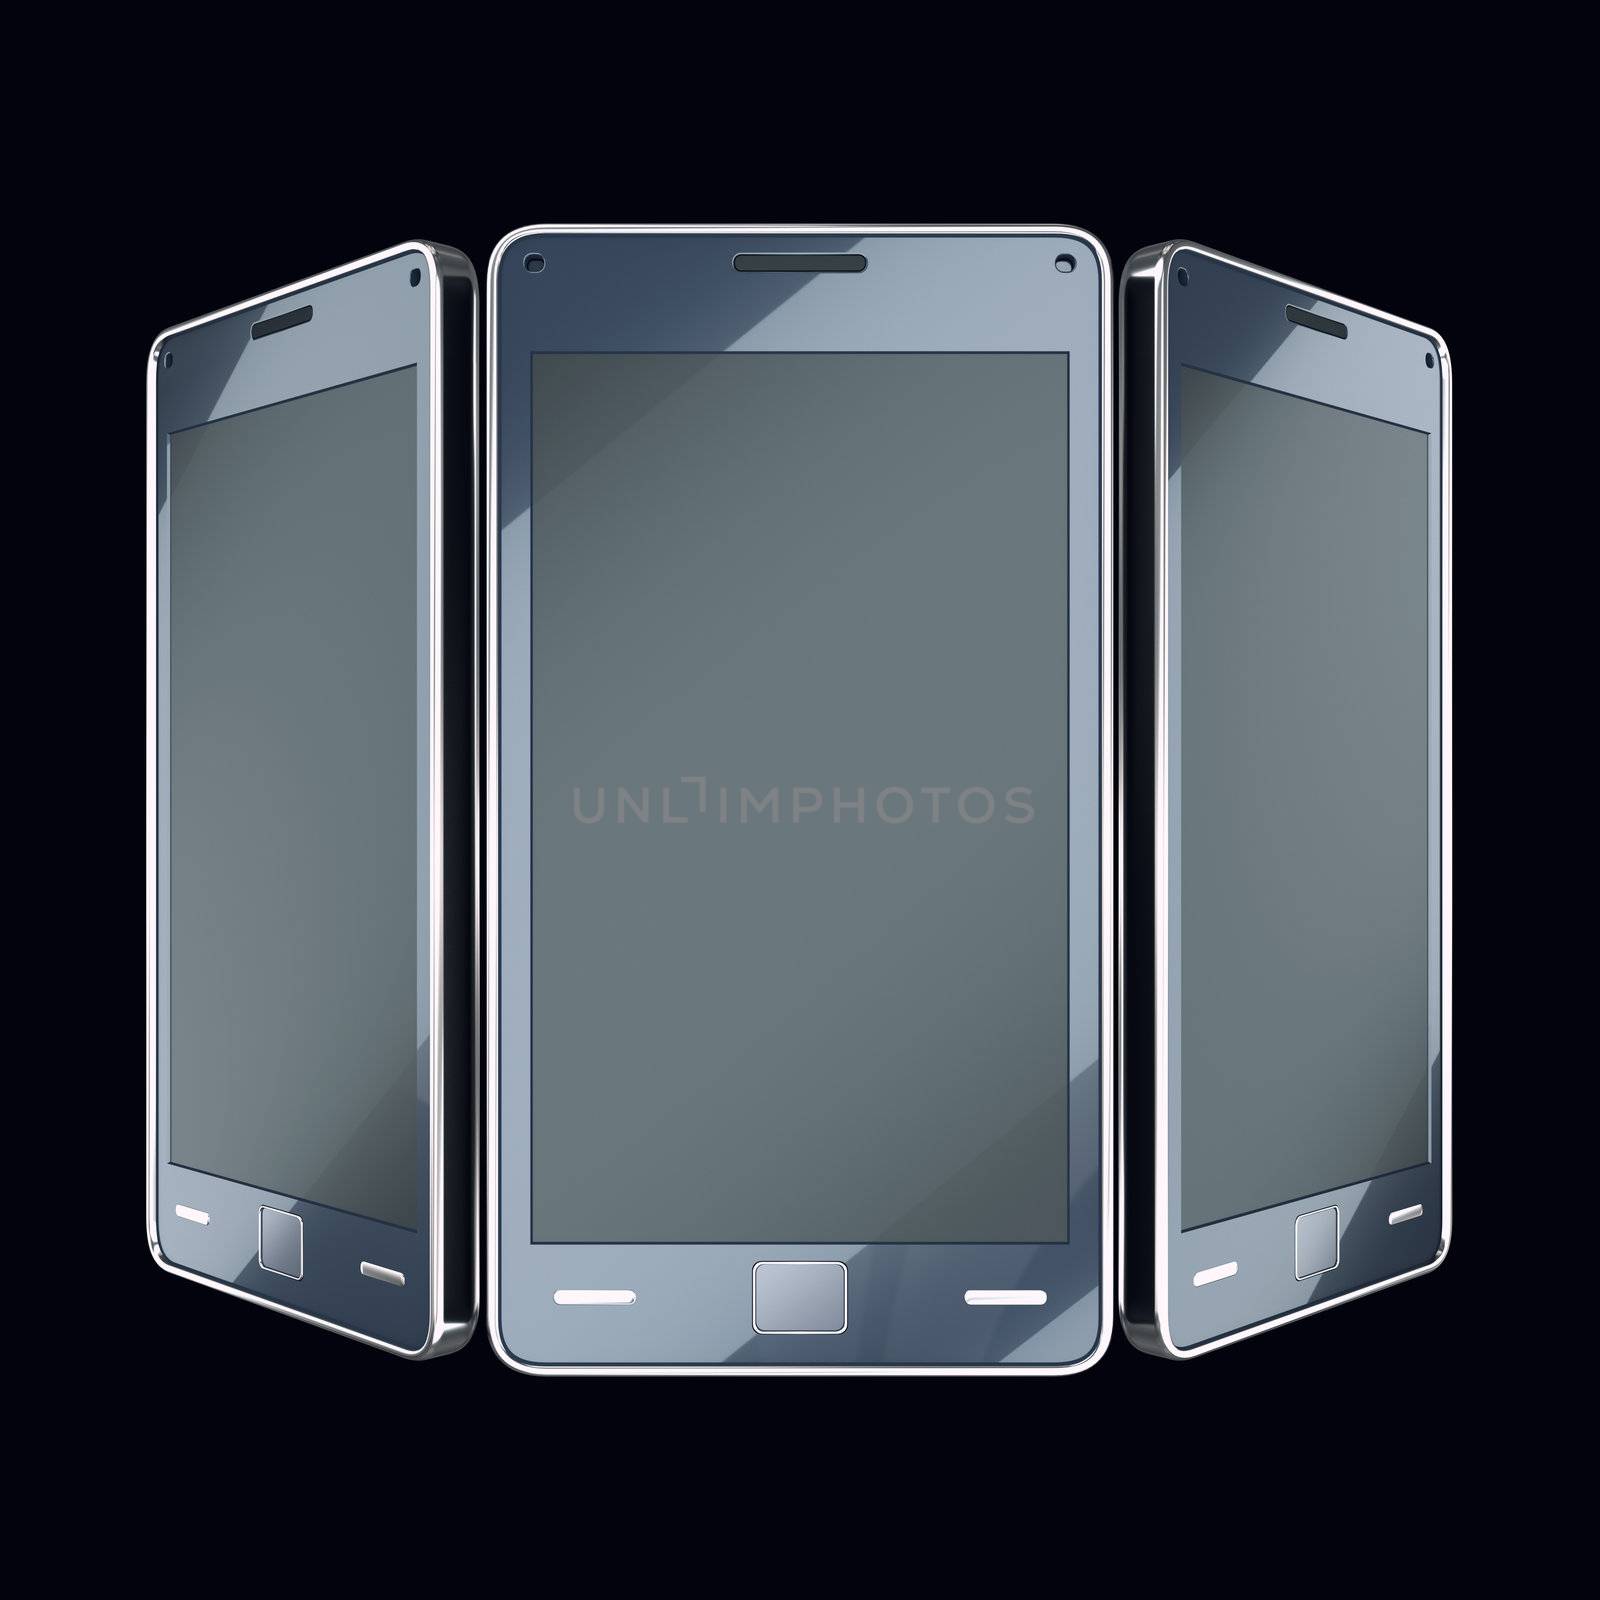 Communication and mobility: smart phones with touch screens on black (custom made and rendered) 